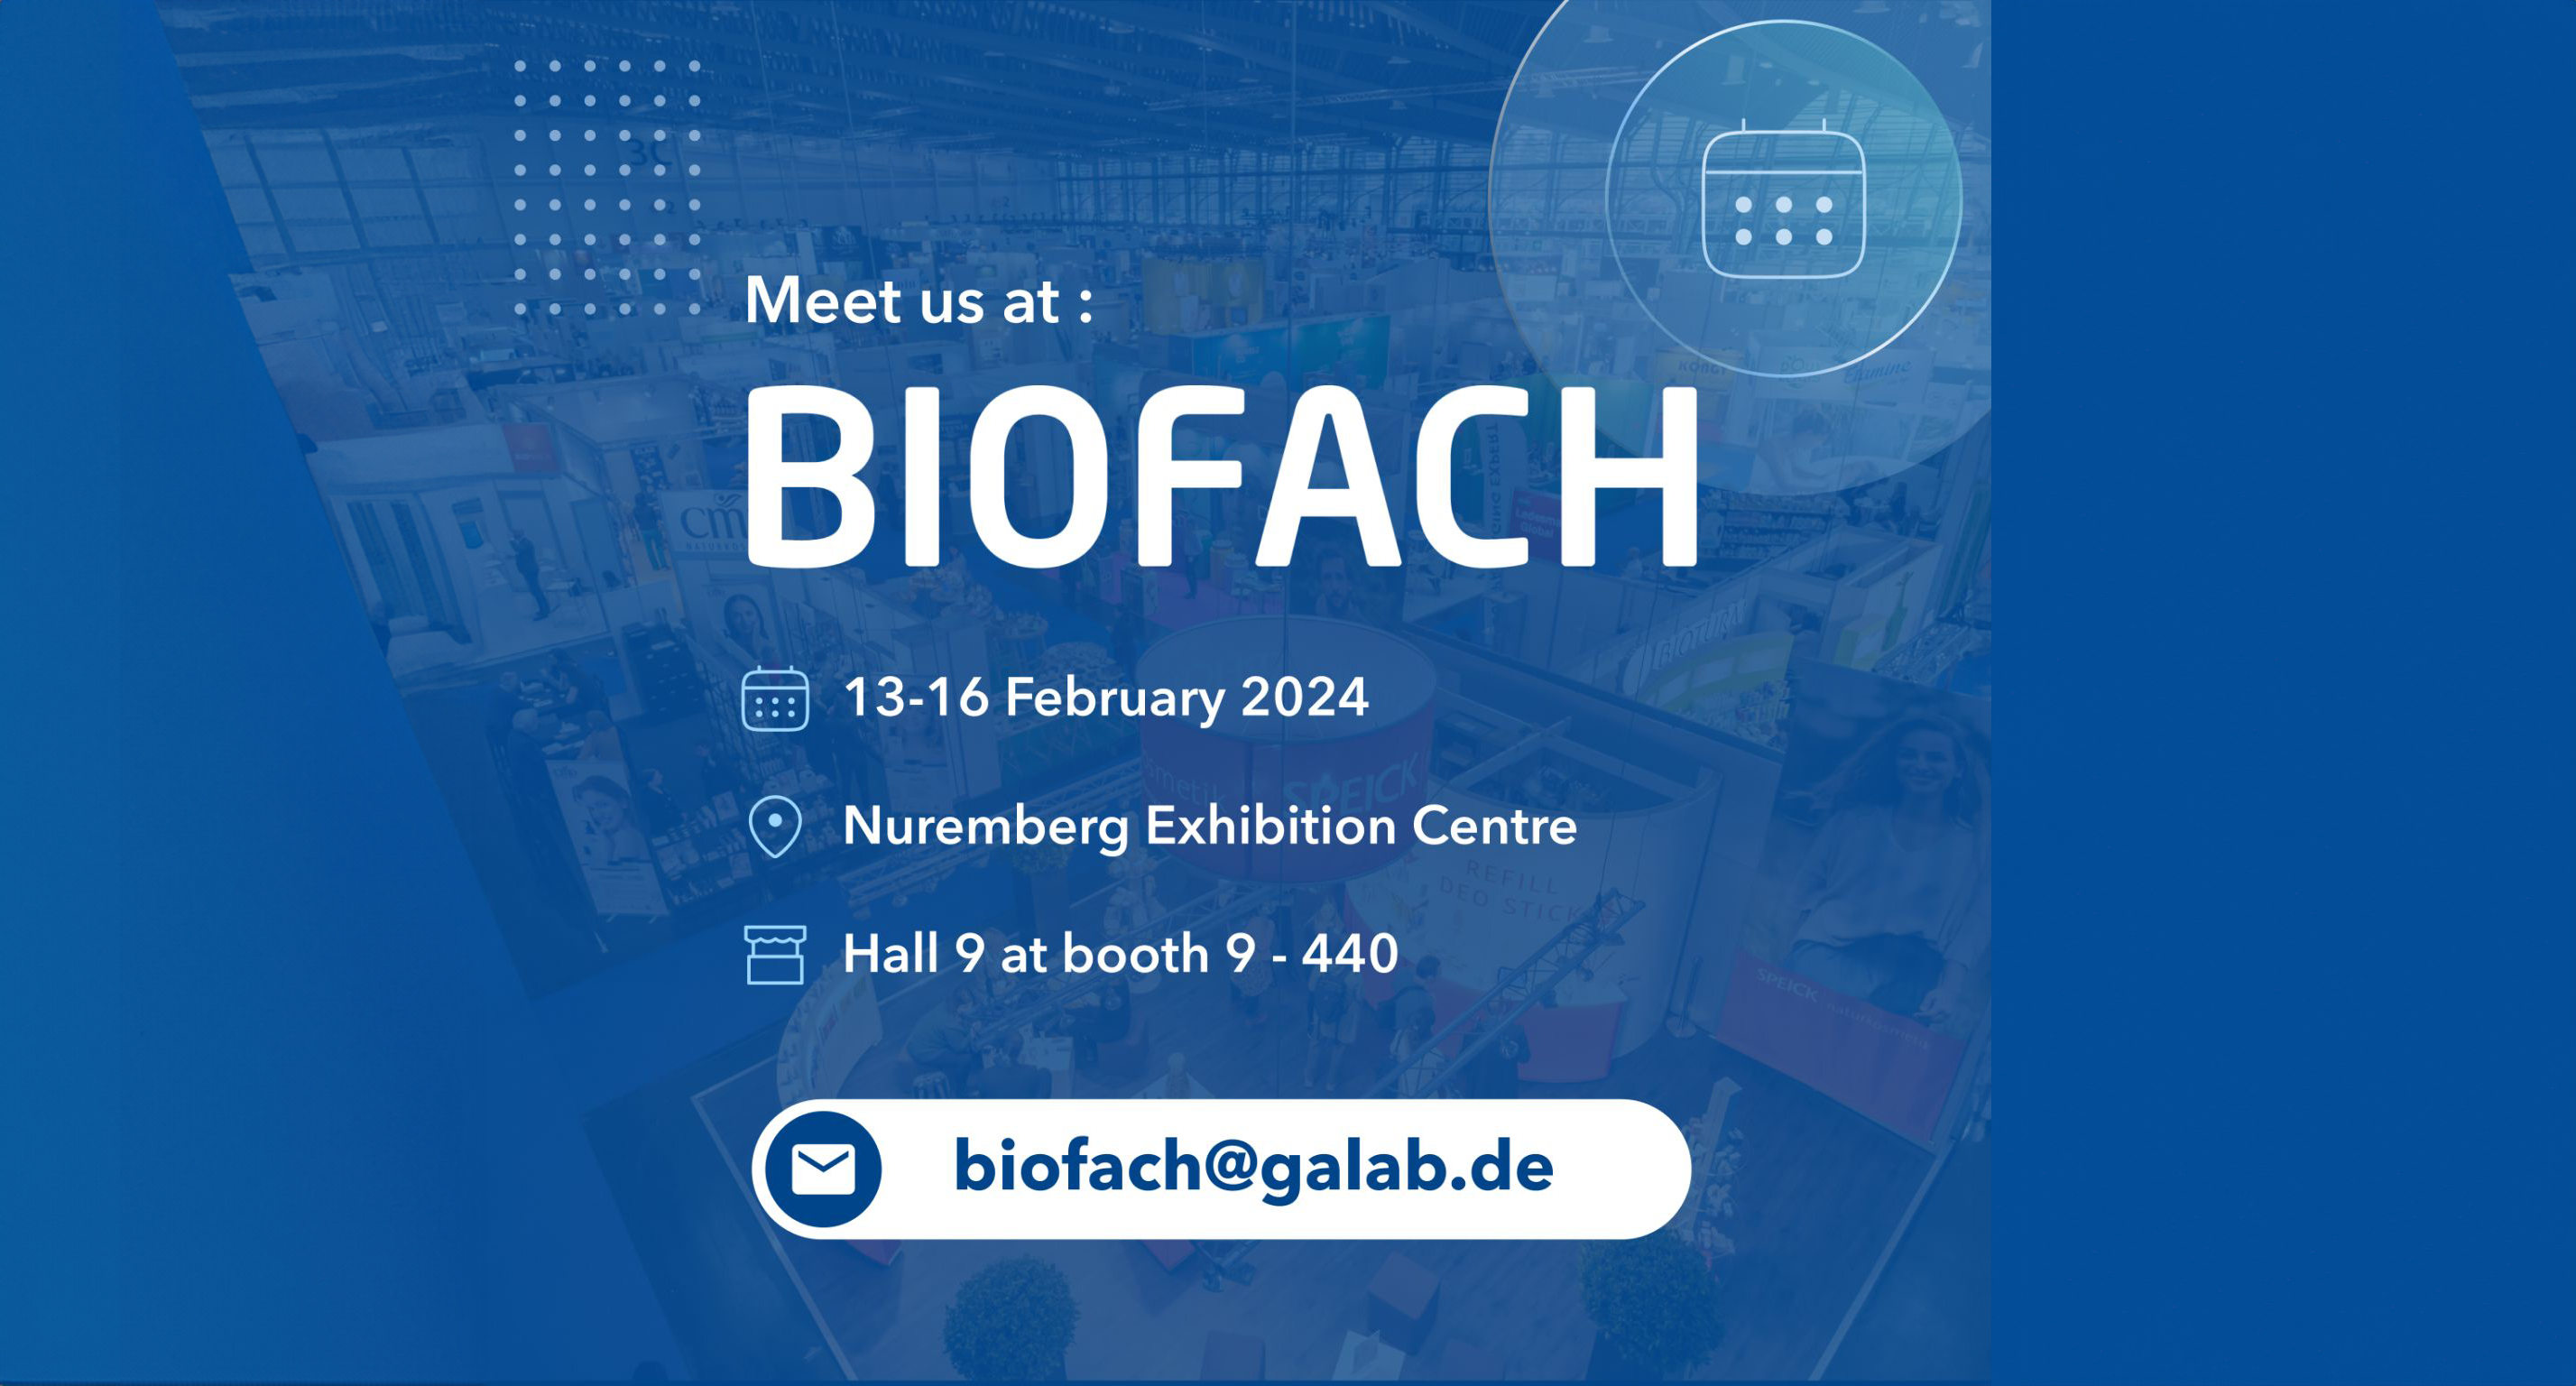 We proudly announce our attendance at BIOFACH 2024